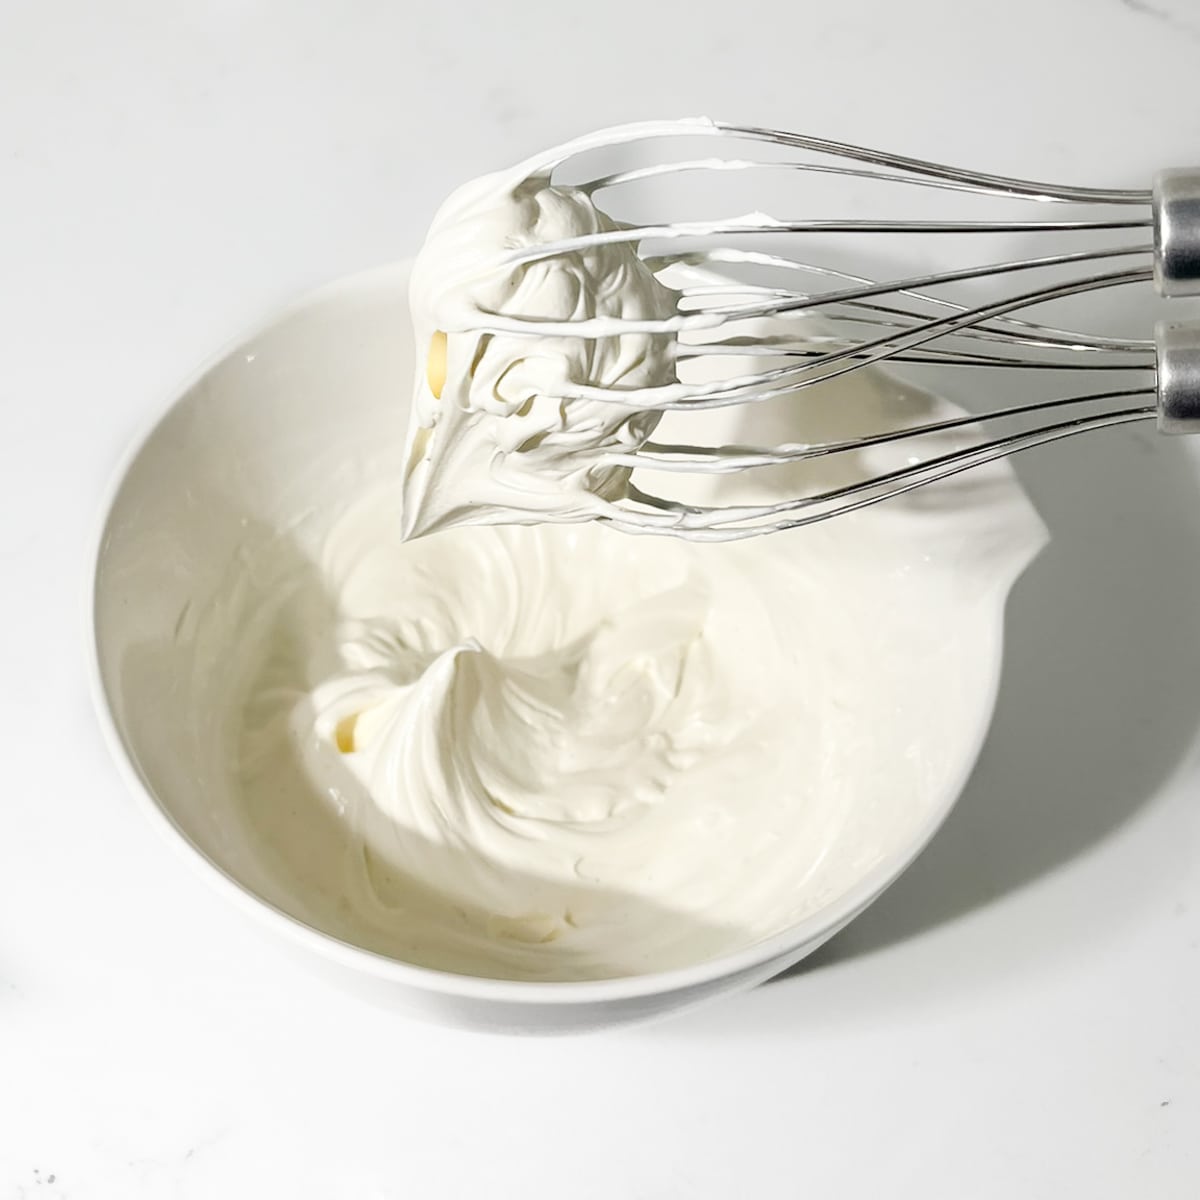 Whipping the mascarpone cream to soft peaks with an electric hand mixer.